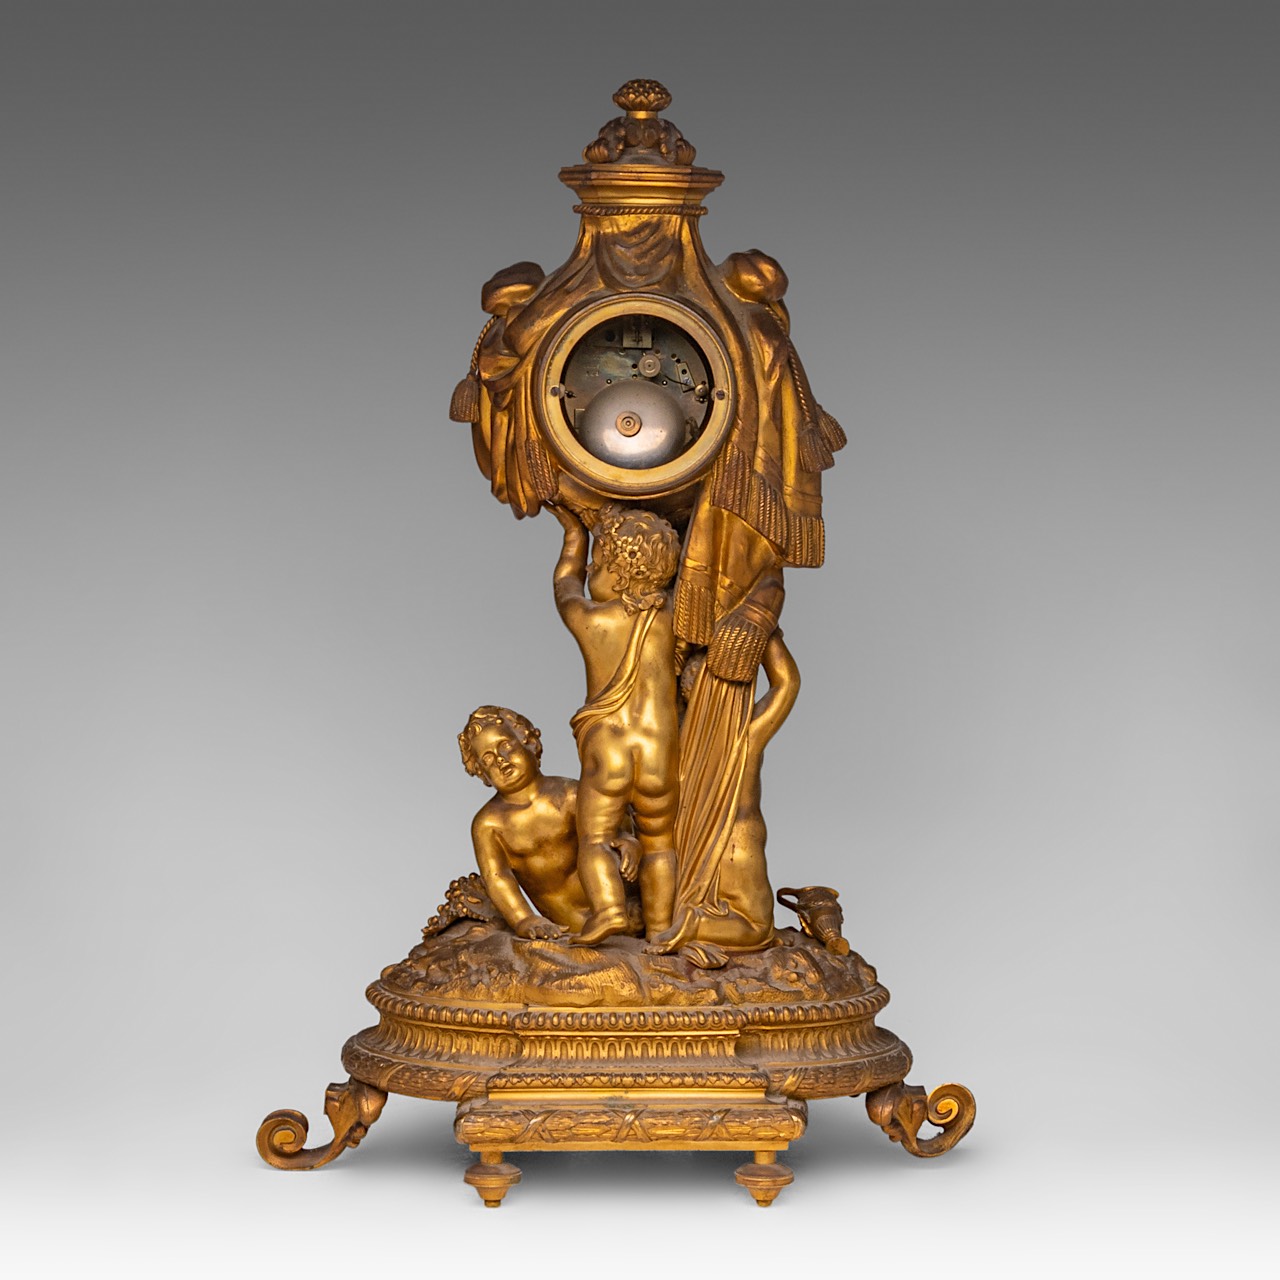 A Neoclassical gilt bronze mantle clock with putti holding the clock case, Lerolle, Paris, H 61 cm - Image 4 of 7